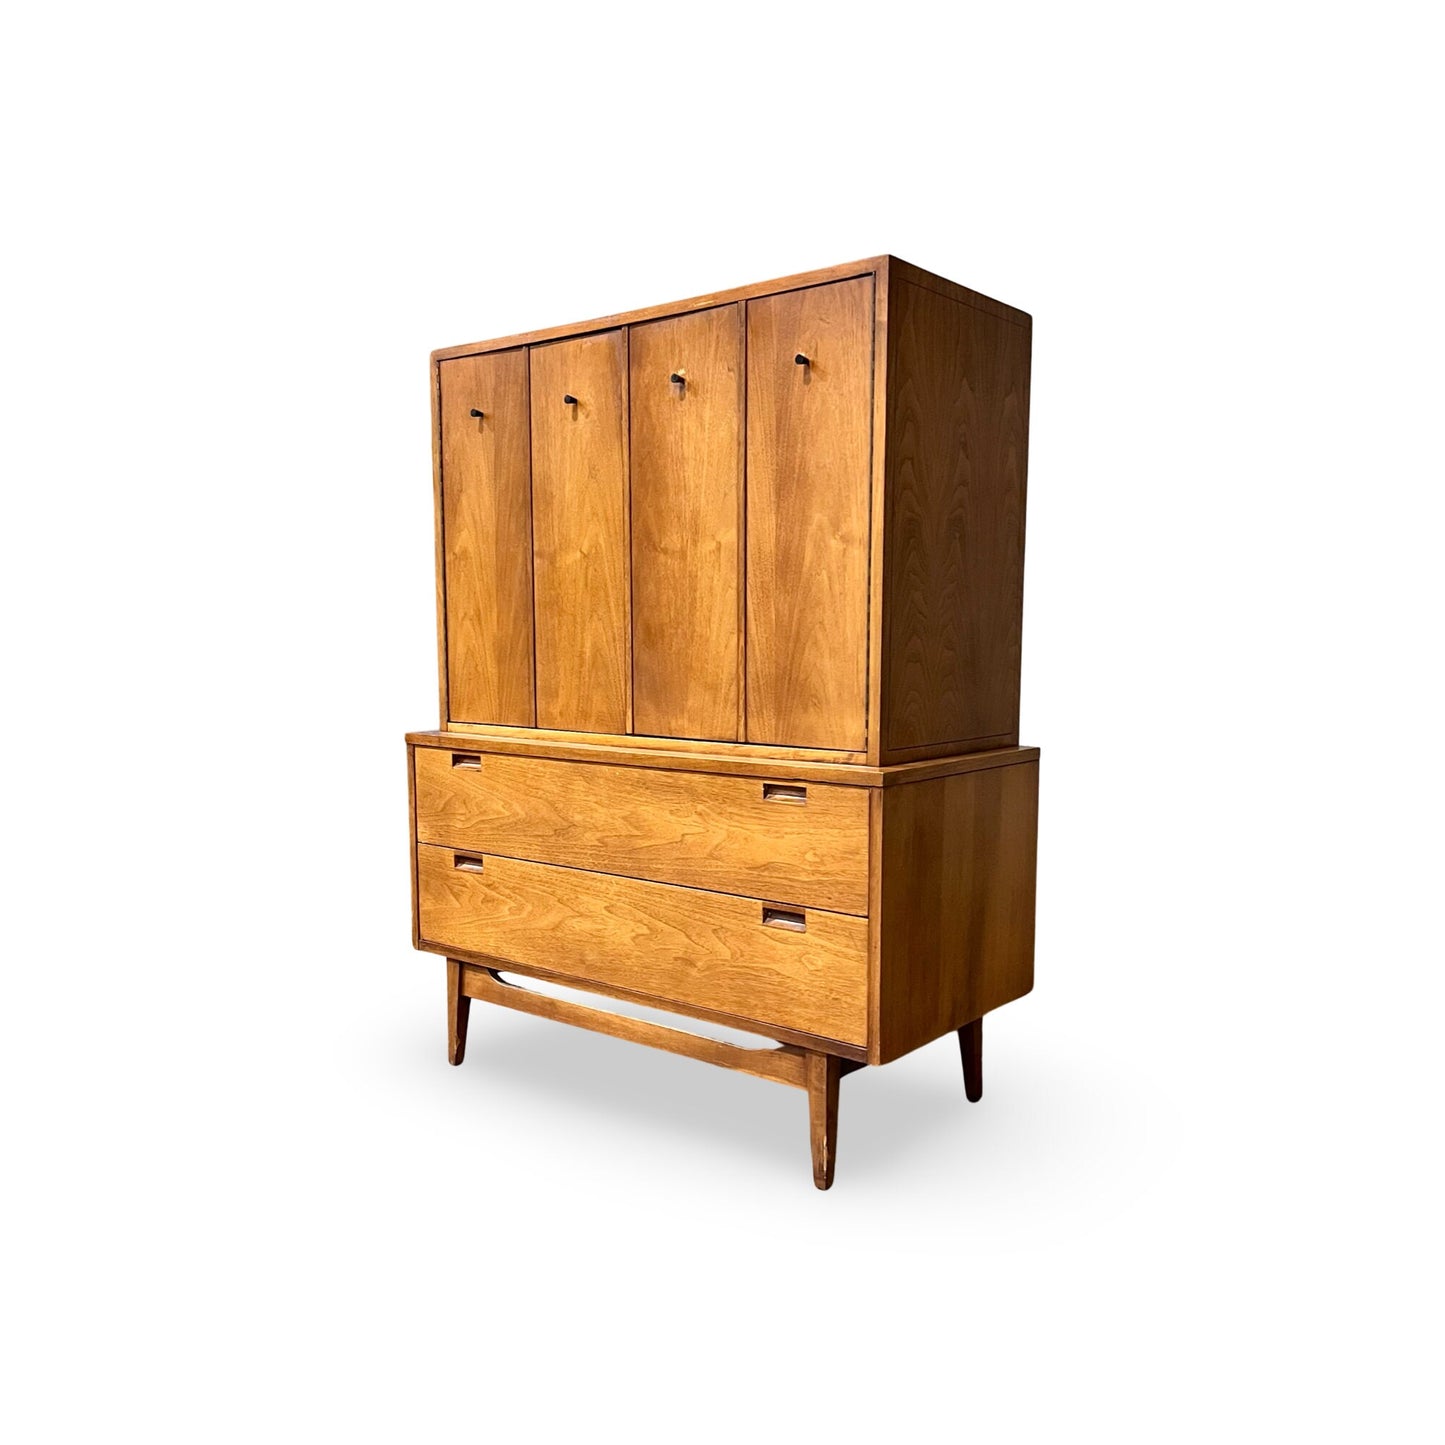 Walnut dresser with rich graining and splayed legs, showcasing traditional craftsmanship.